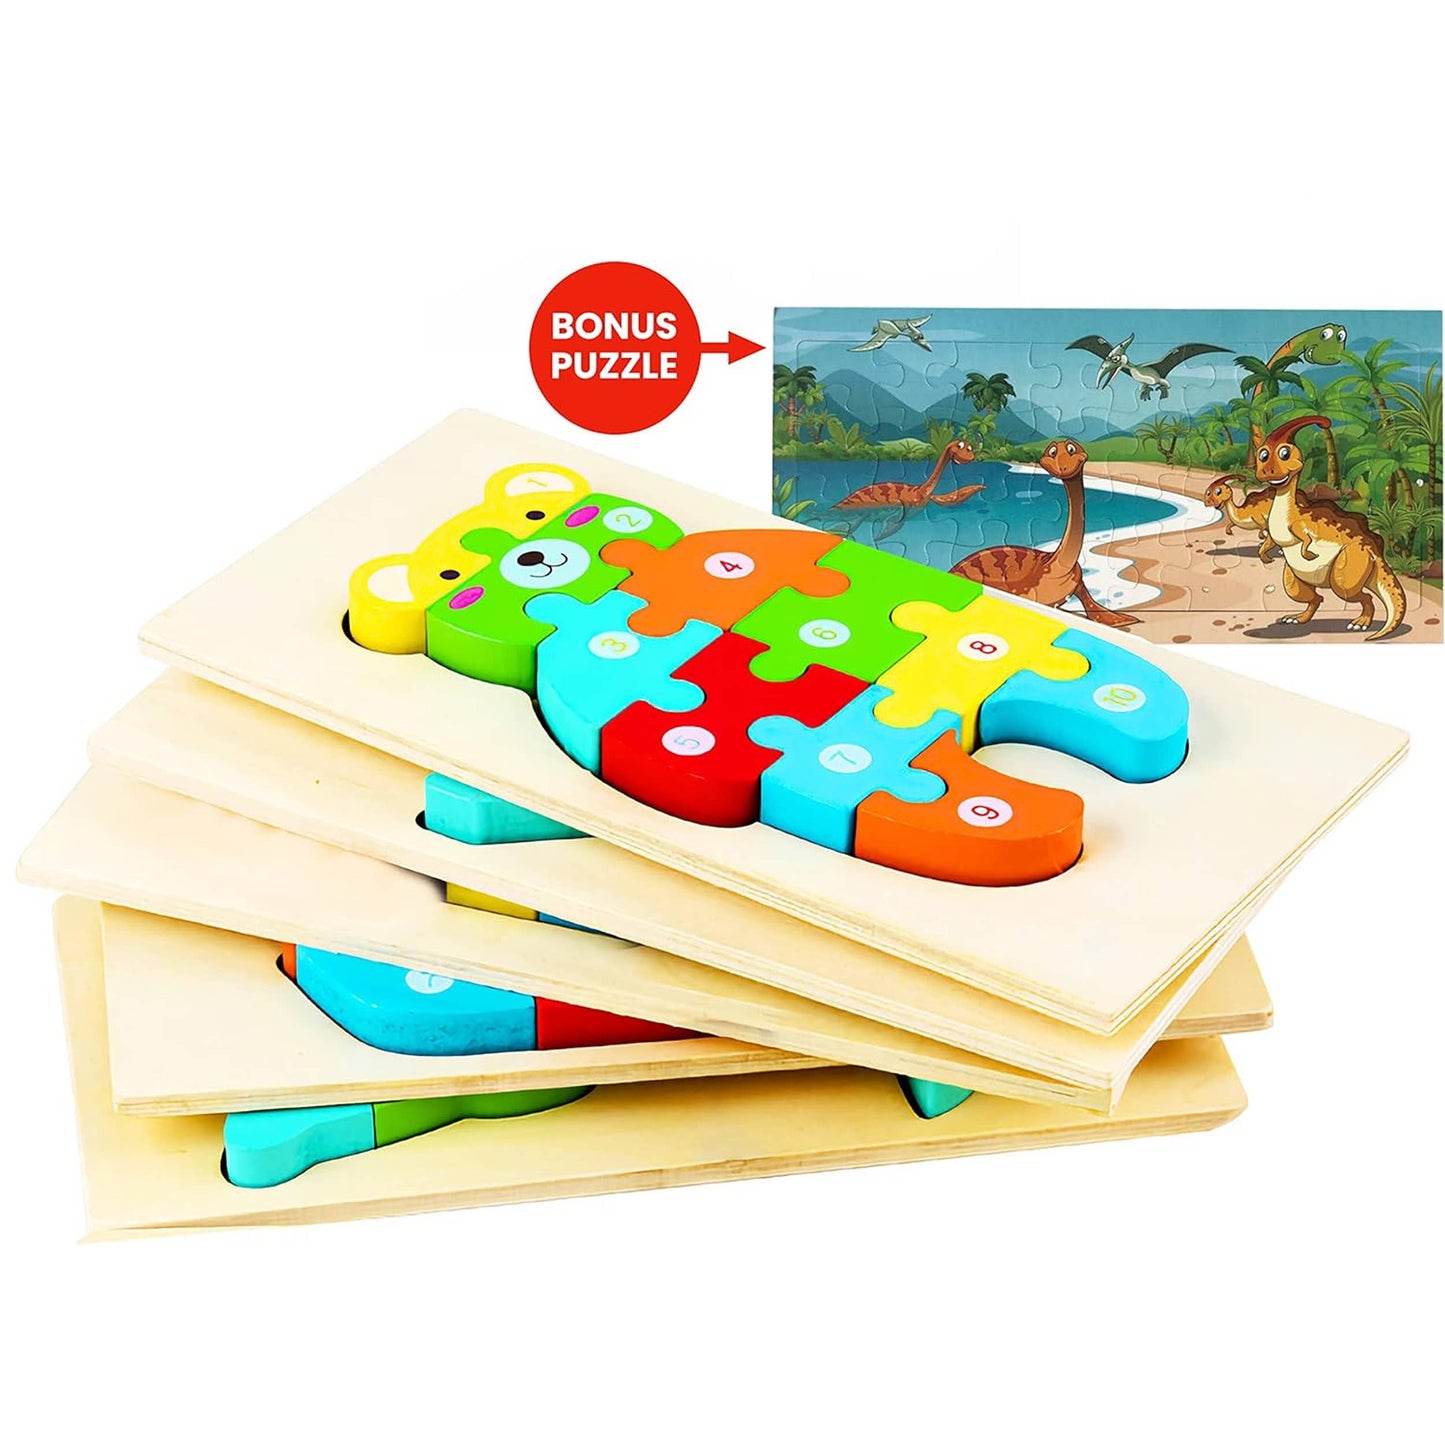 Wooden Puzzle, Educational Toy Gift - Assorted